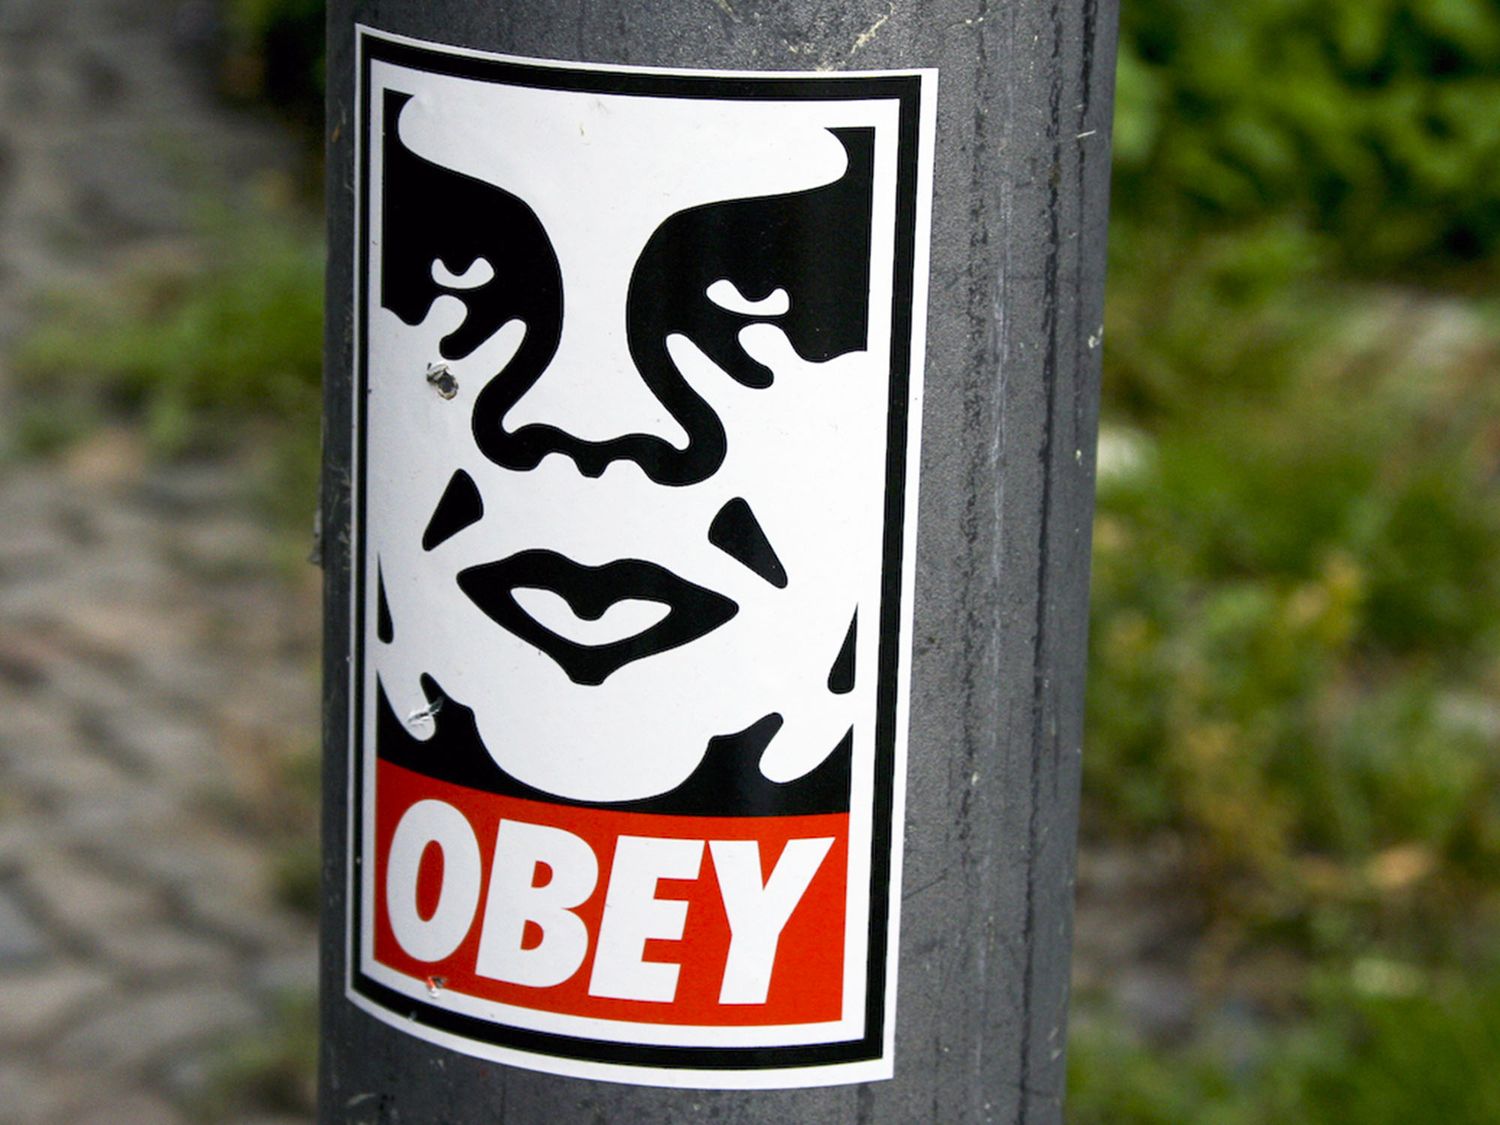 Easy to carry and quick to stick, stickers have been the specialty of Shepard Fairey aka Obey for a long time, he has stuck over a million of them on city walls around the world and he still continues.